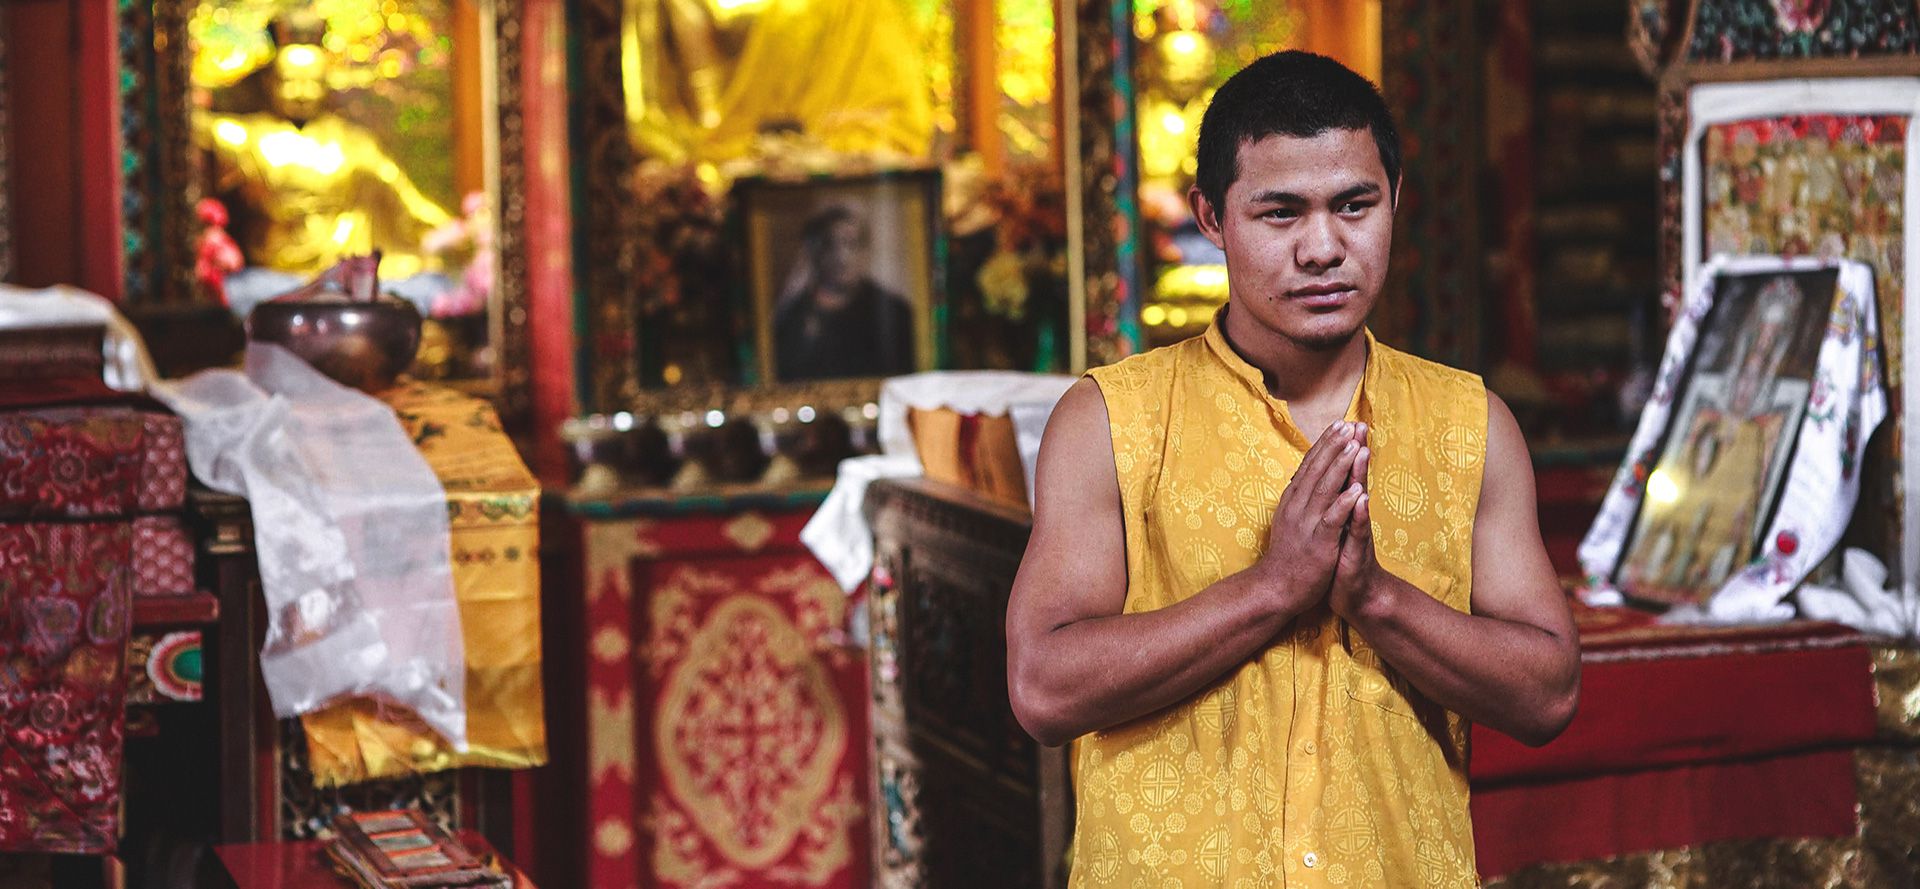 Buddhist in the temple.